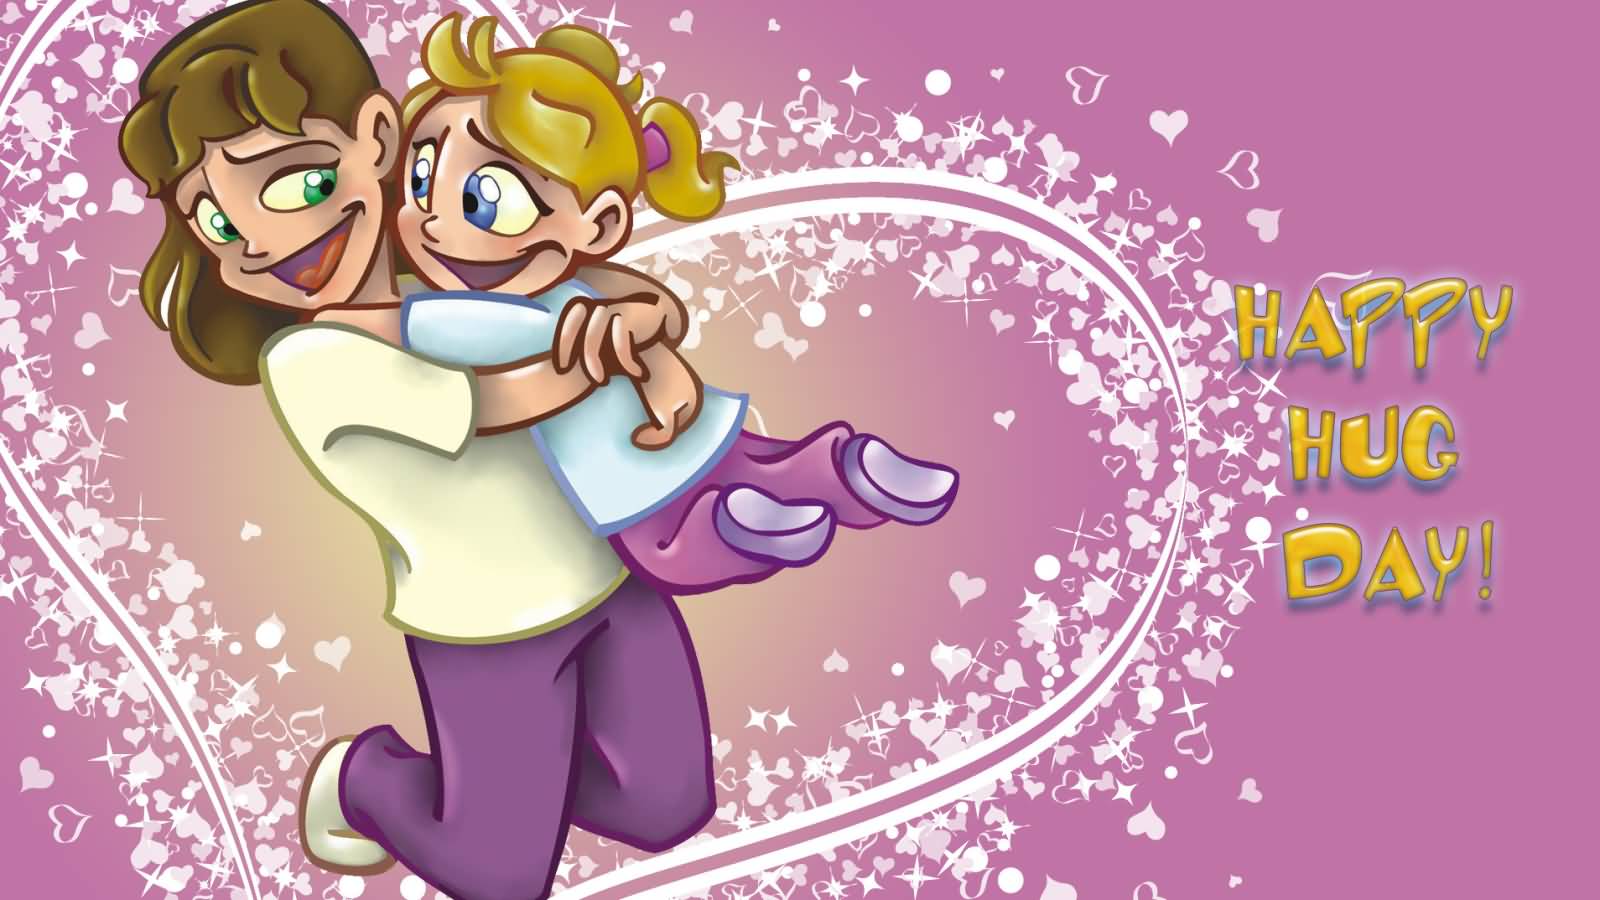 Happy Hug Day Greeting Card Picture And Image